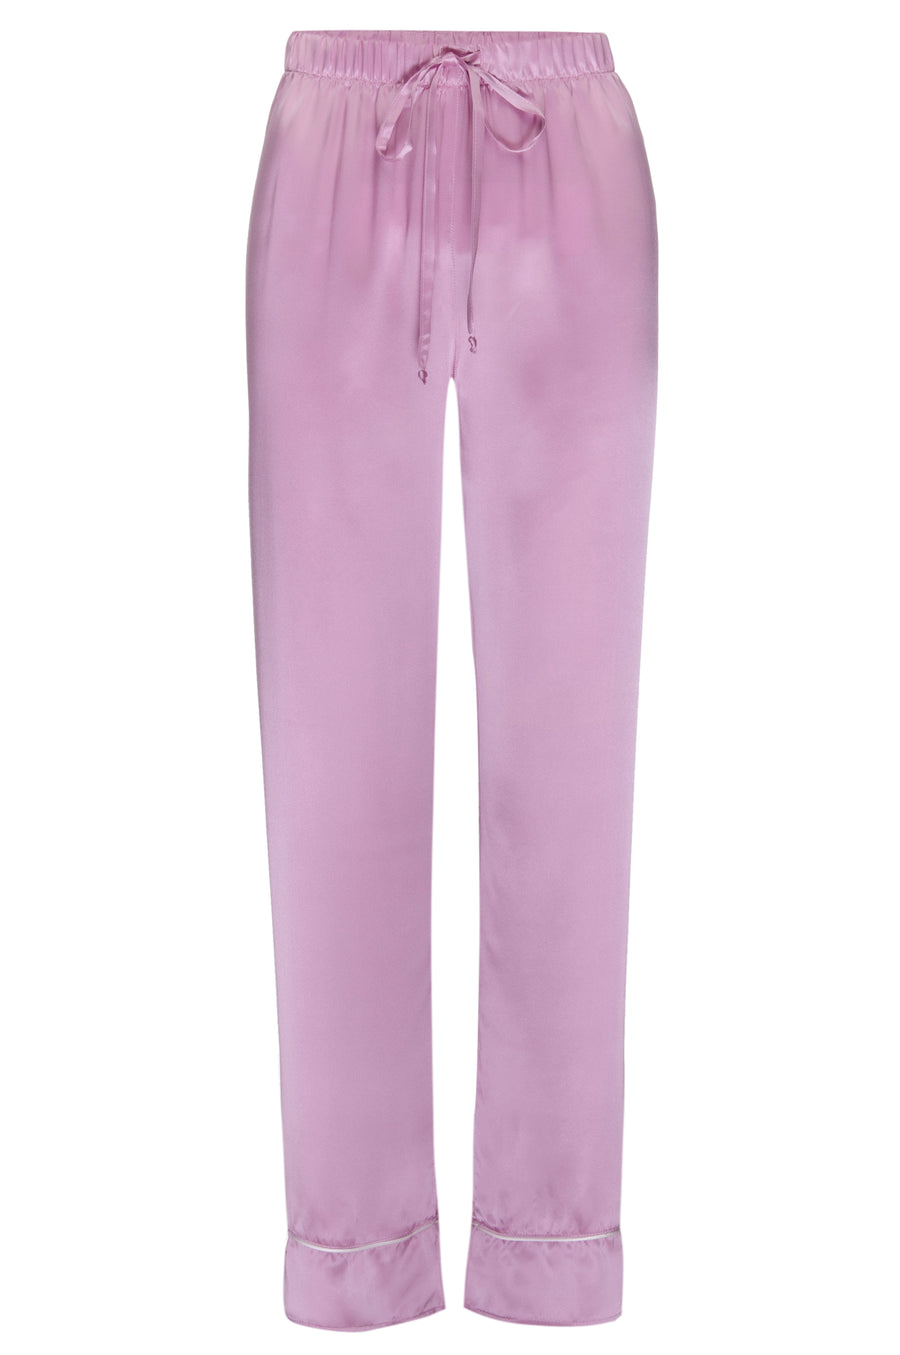 Silk Charmeuse PJ Pants: Orchid Pink